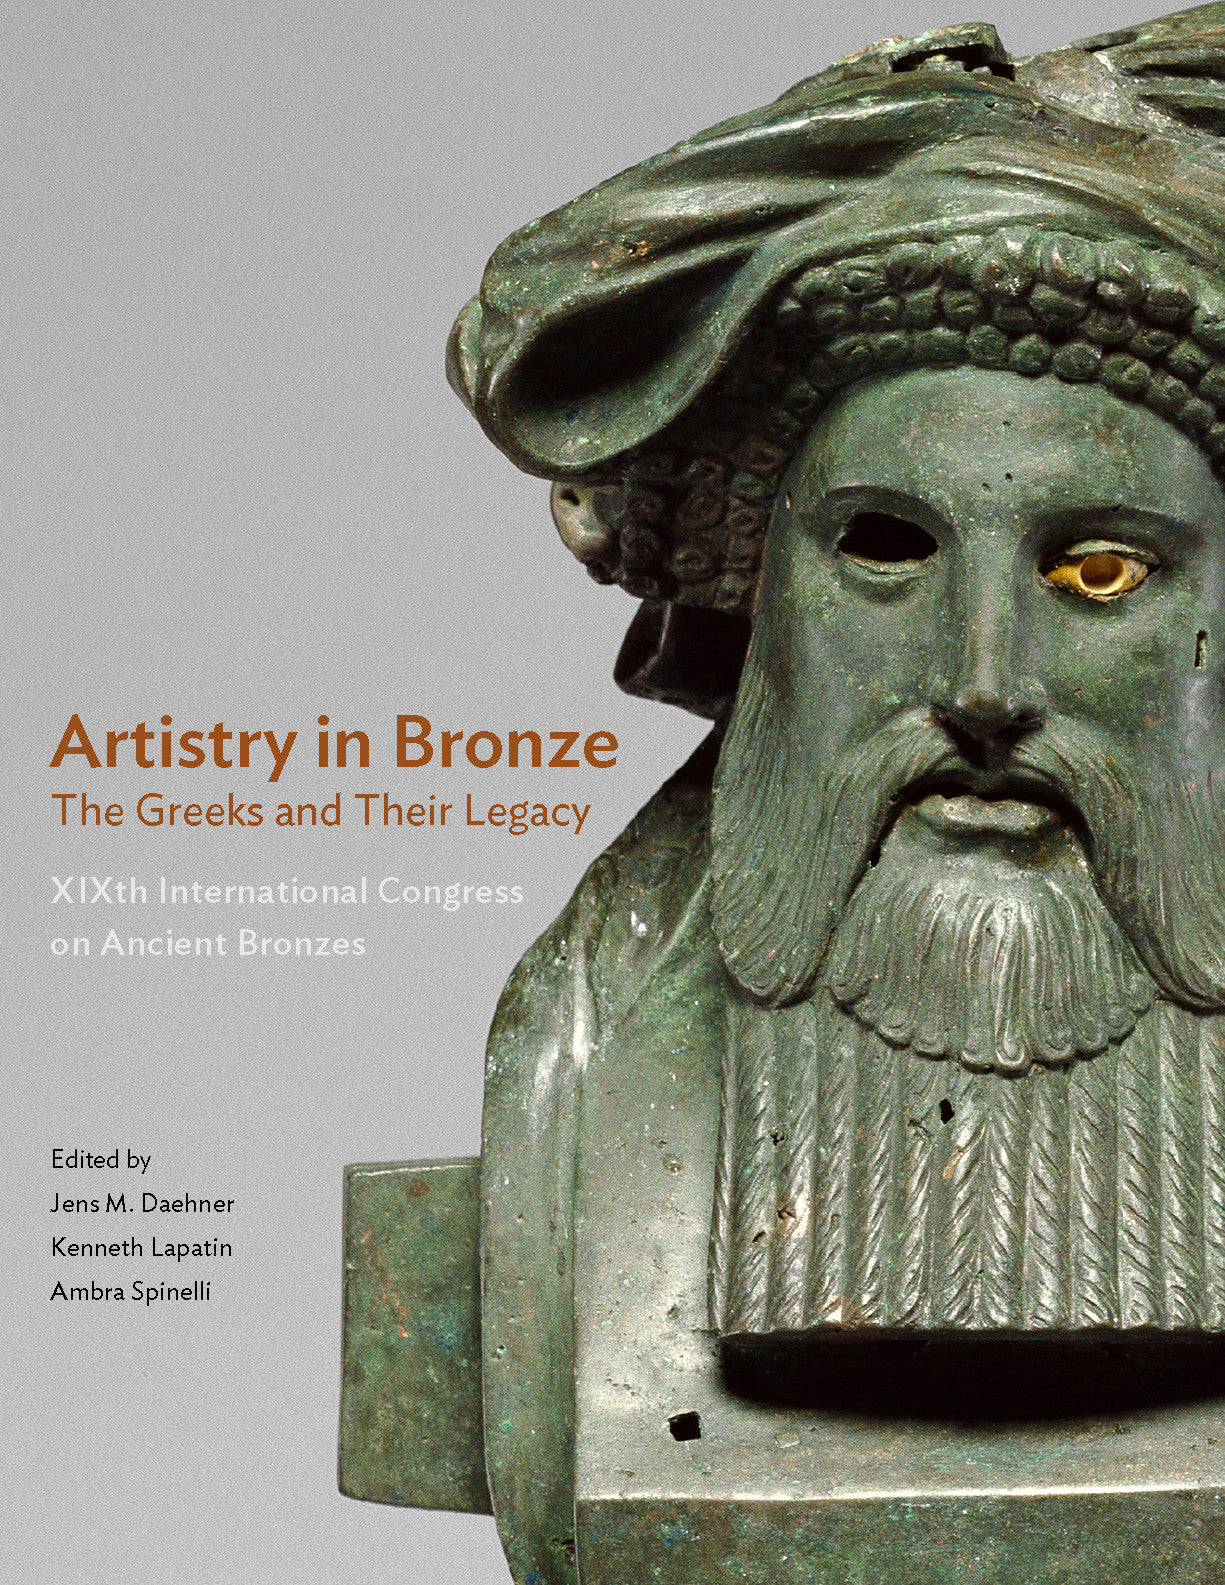 Artistry in Bronze: The Greeks and Their Legacy -XIXth International Congress on Ancient Bronzes | Getty Store